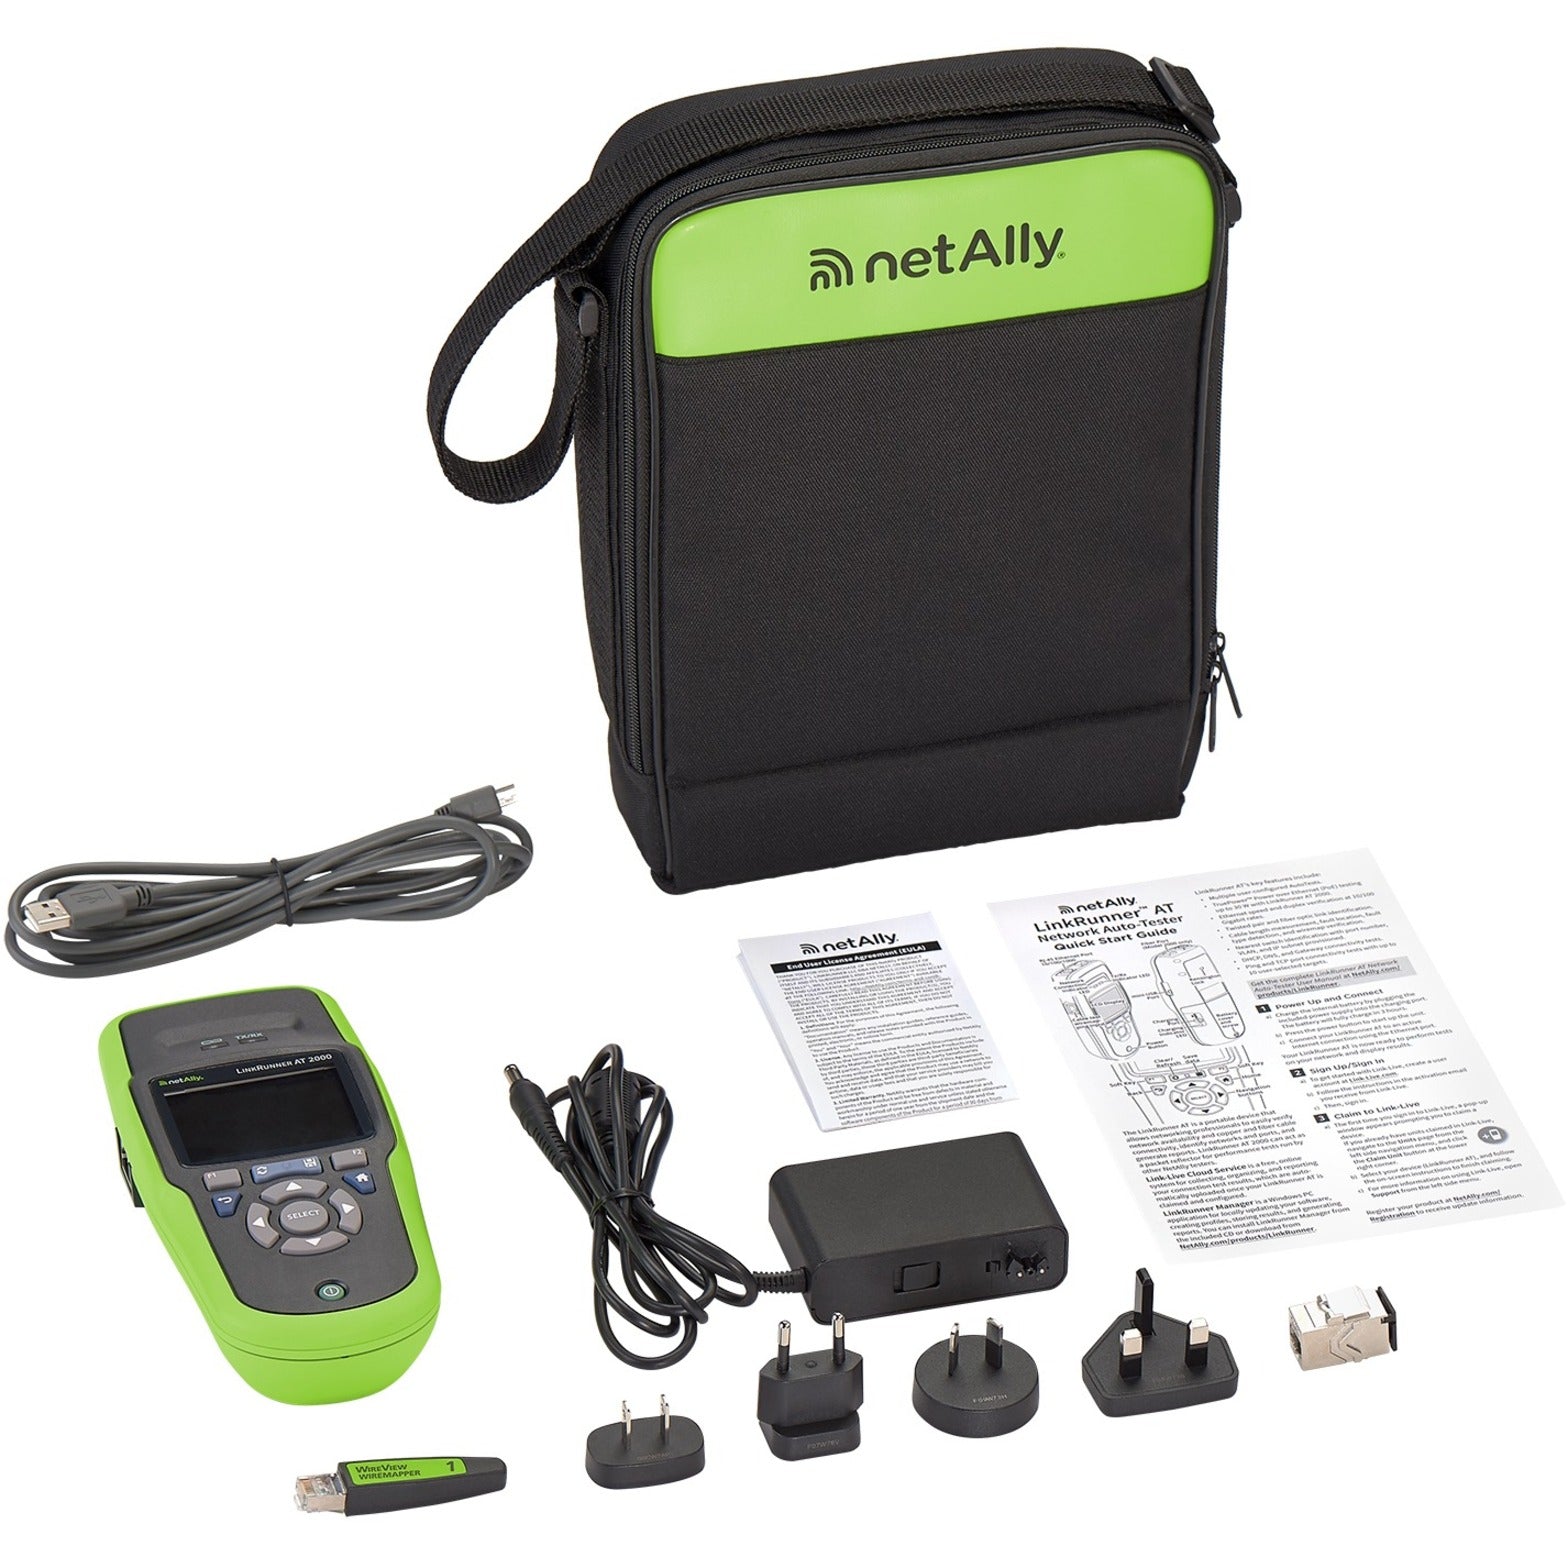 NetAlly LRAT-2000 LinkRunner Network Testing Device, 2.8" LCD Screen, USB and PoE Ports, Twisted Pair Support